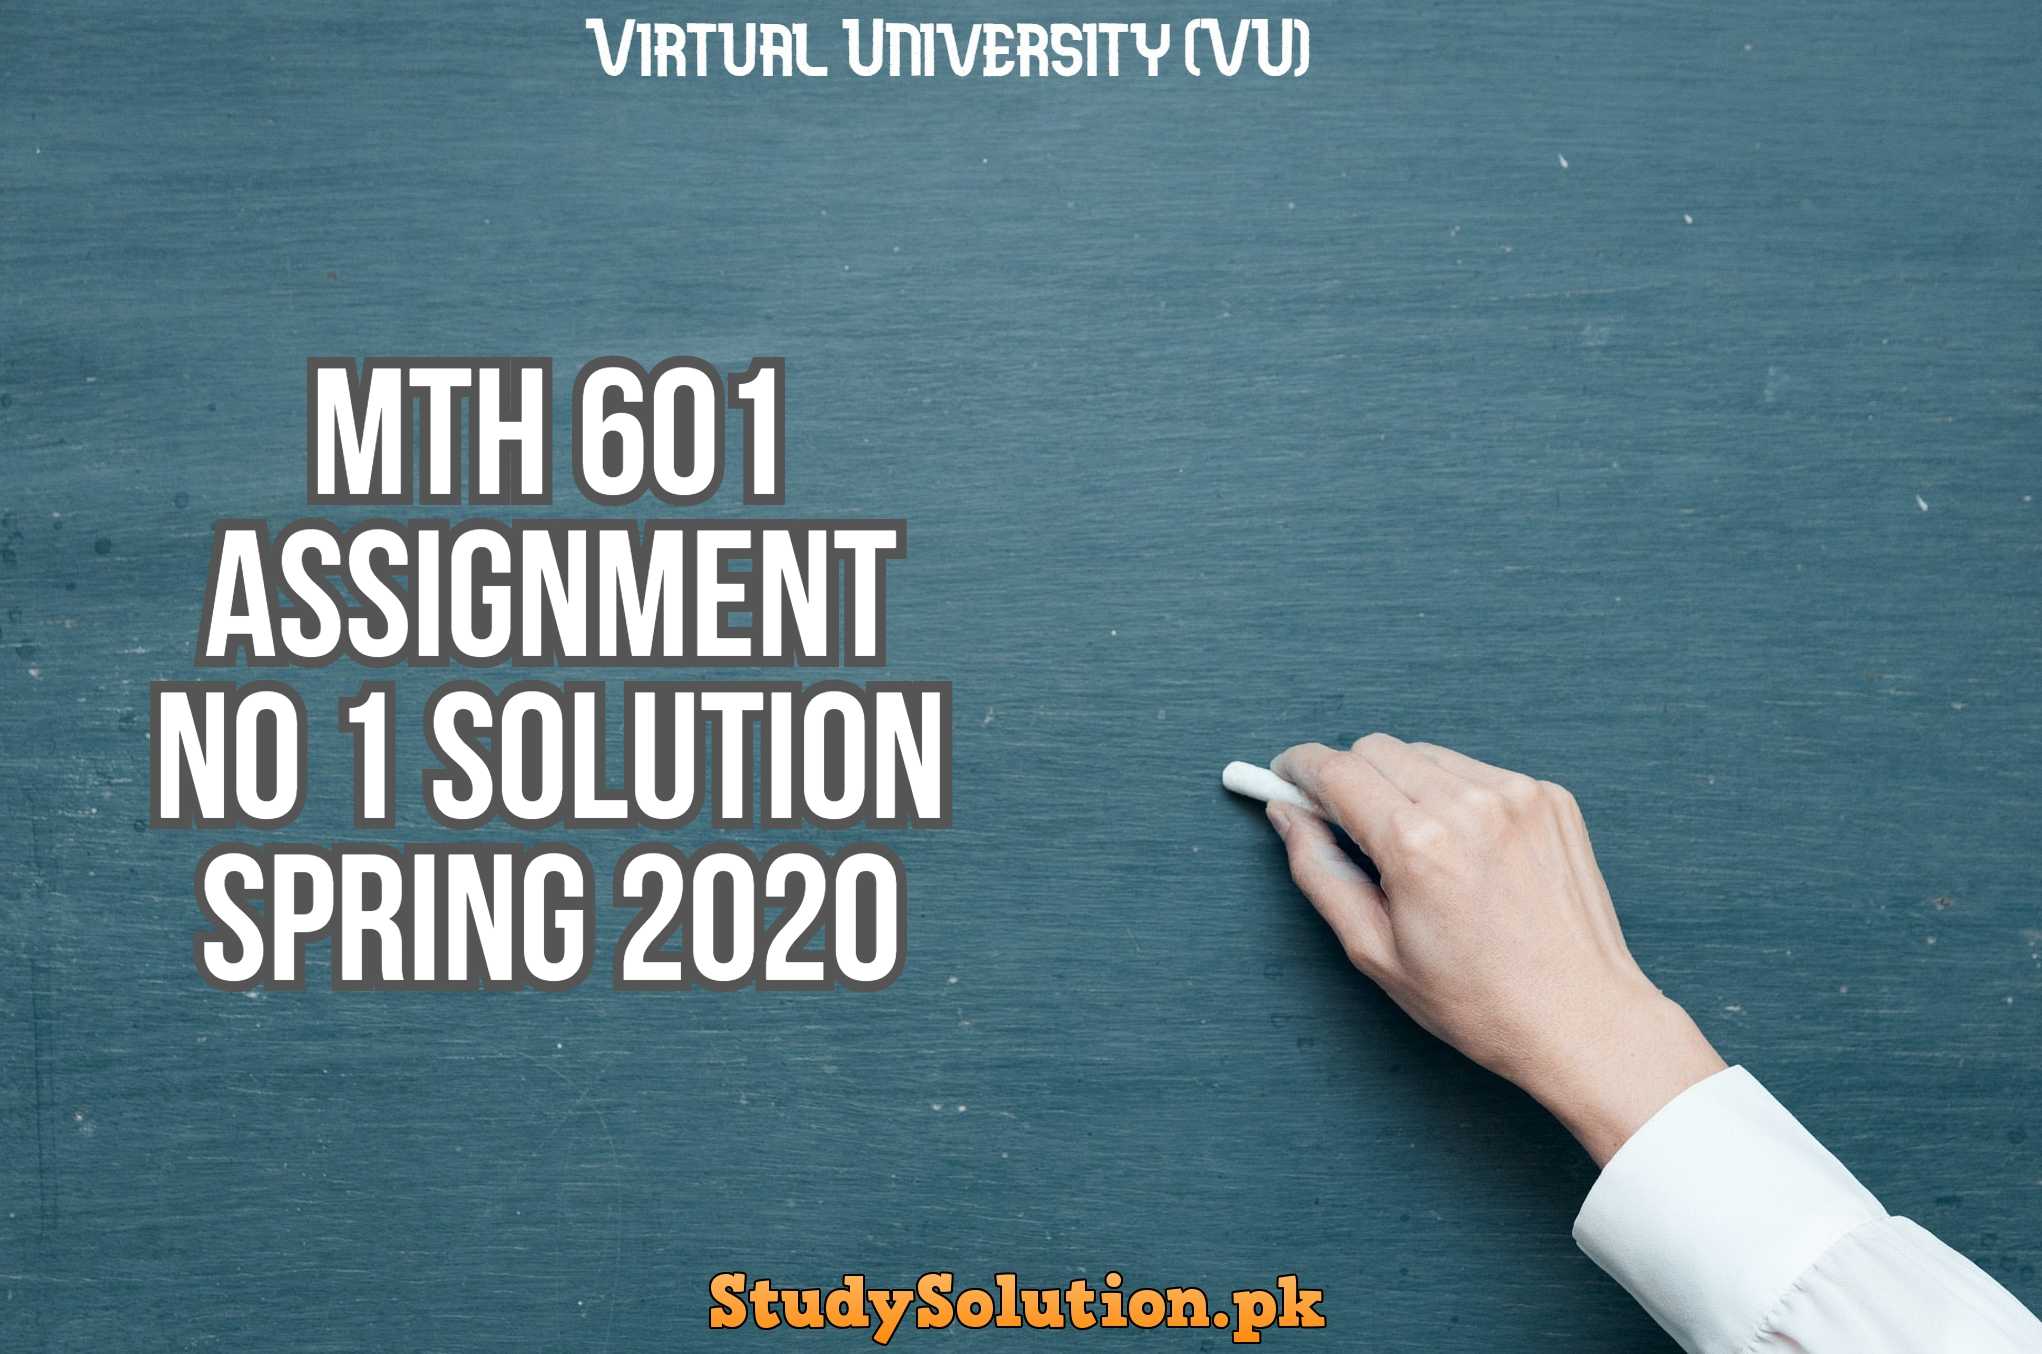 MTH 601 Assignment No 1 Solution Spring 2020